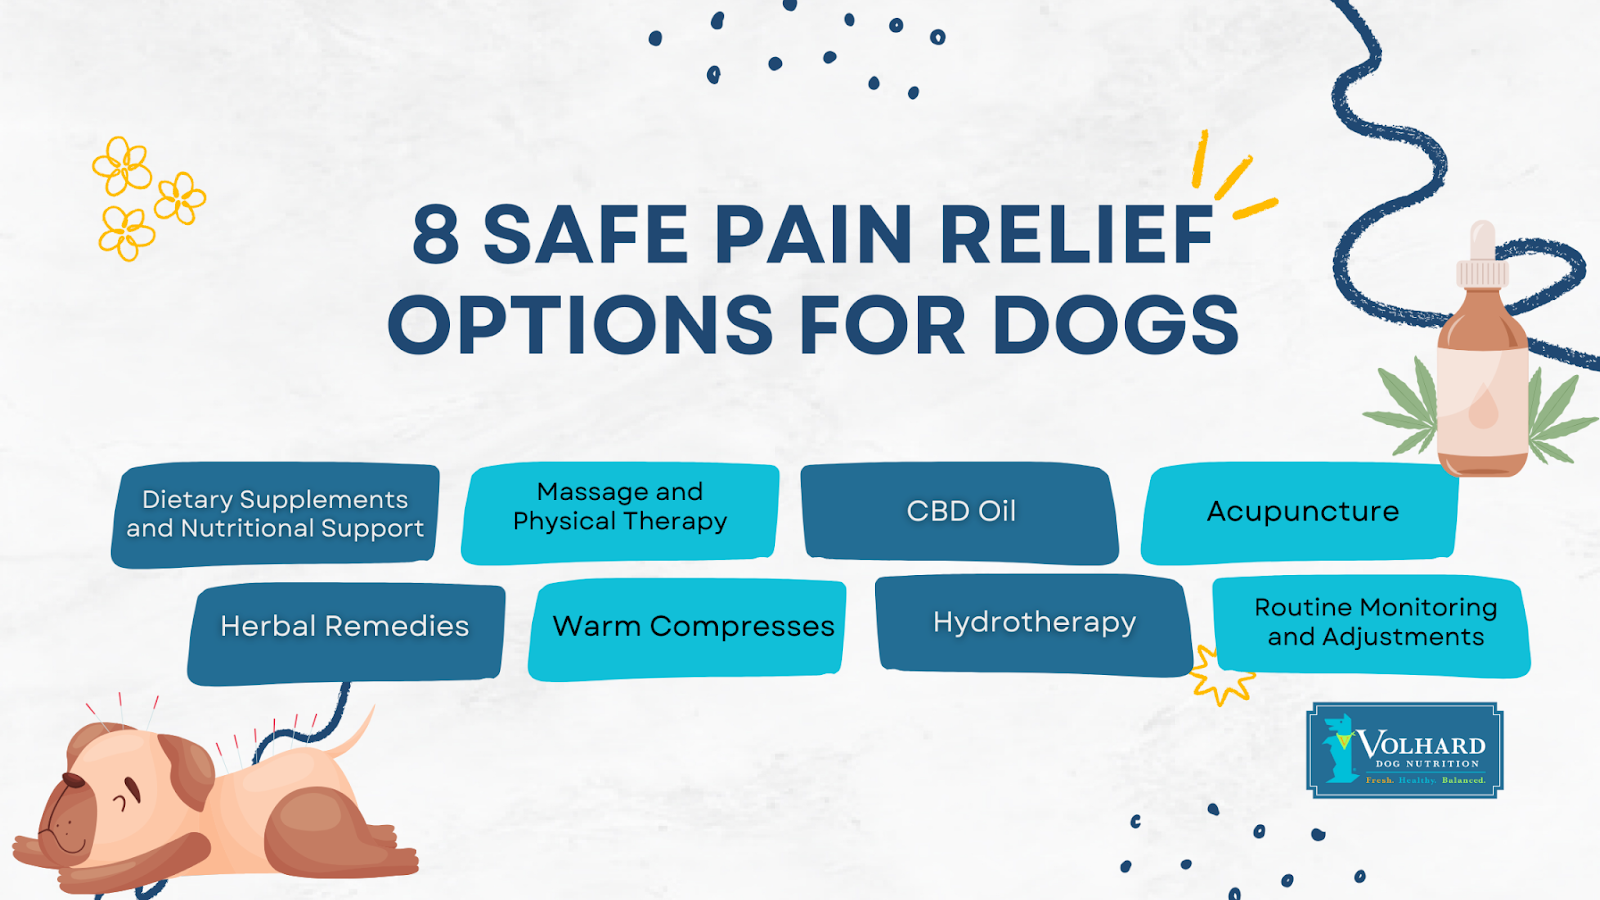 8 safe pain relief options for dogs